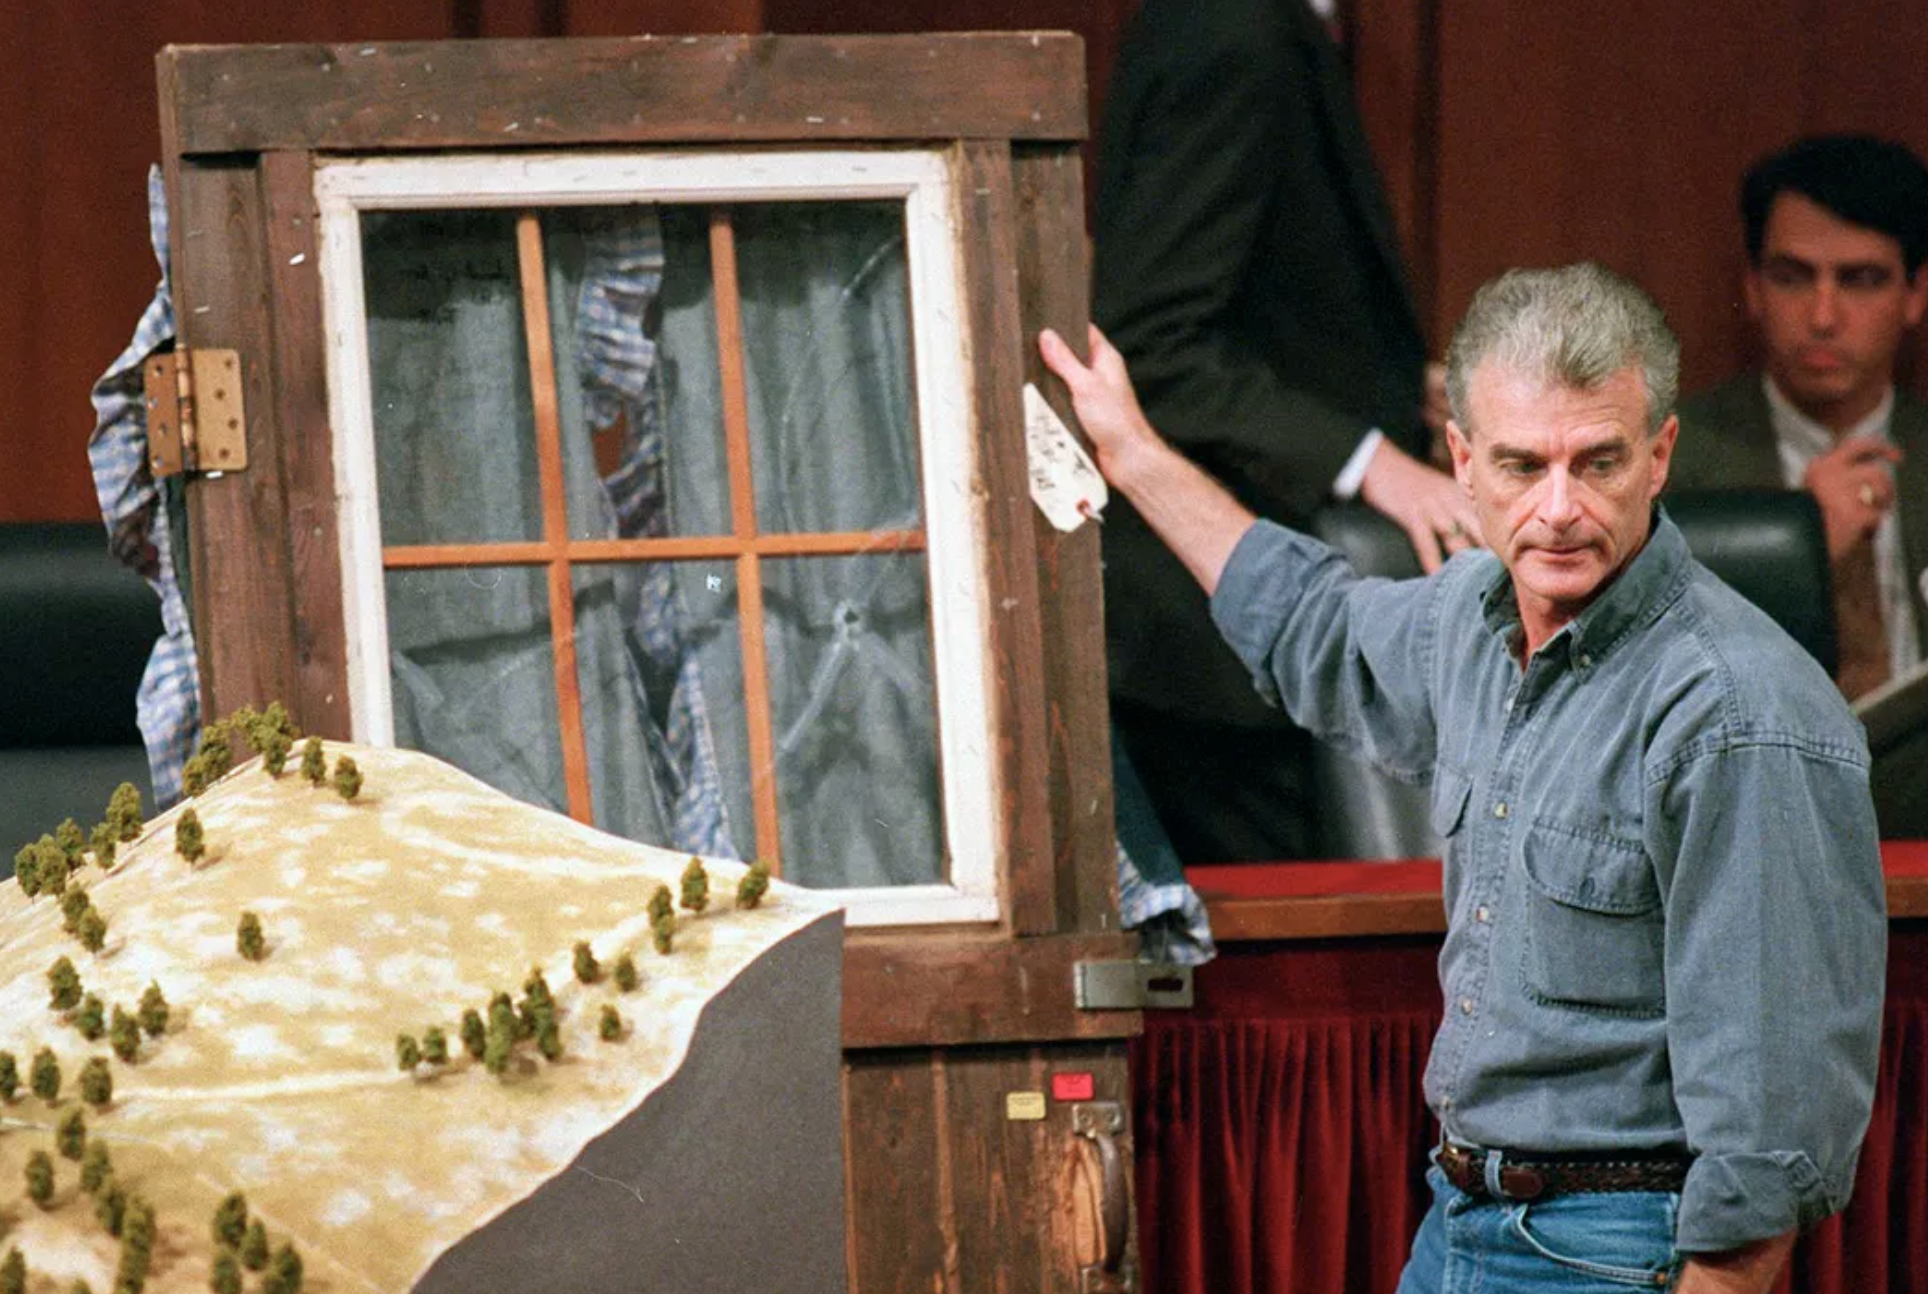 Randy Weaver holds the door of his cabin showing holes from bullets fired during the 1992 siege of his Ruby Ridge, Idaho, home during testimony before the Senate Judiciary Subcommittee on Capitol Hill in Washington, D.C., on Sept. 6, 1995.